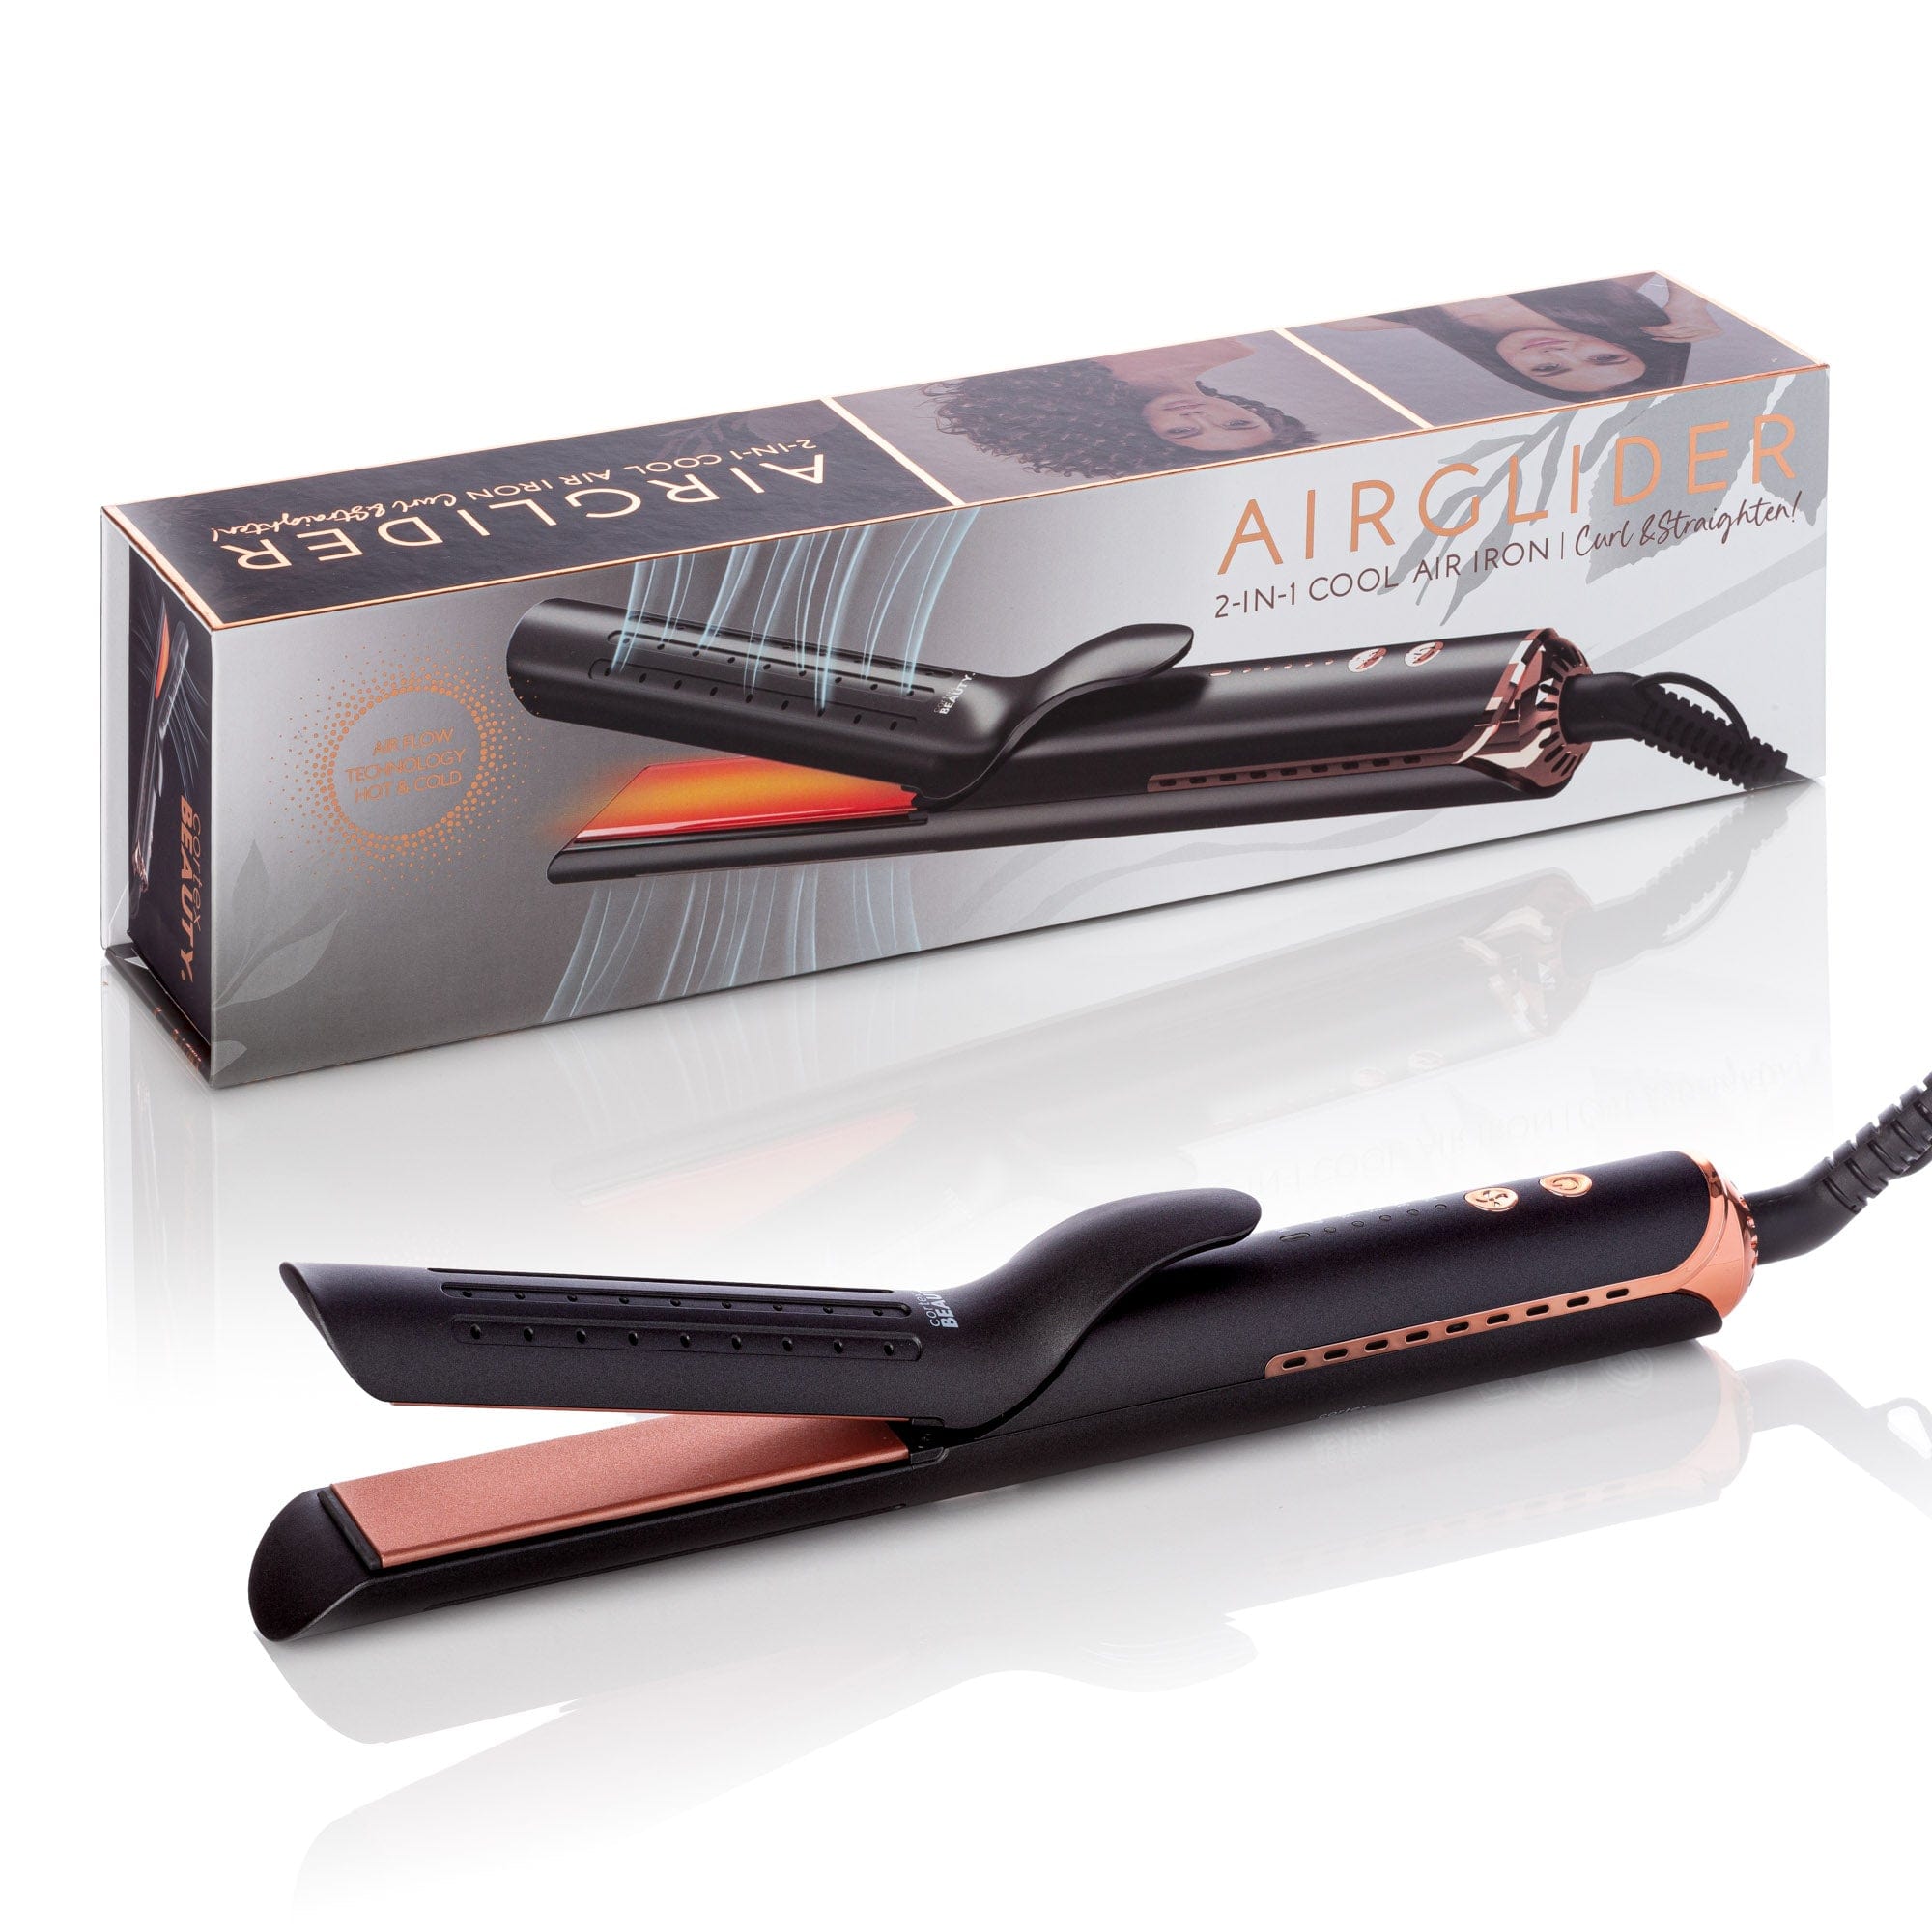 Styler with heated outer plates for different looks B27 100